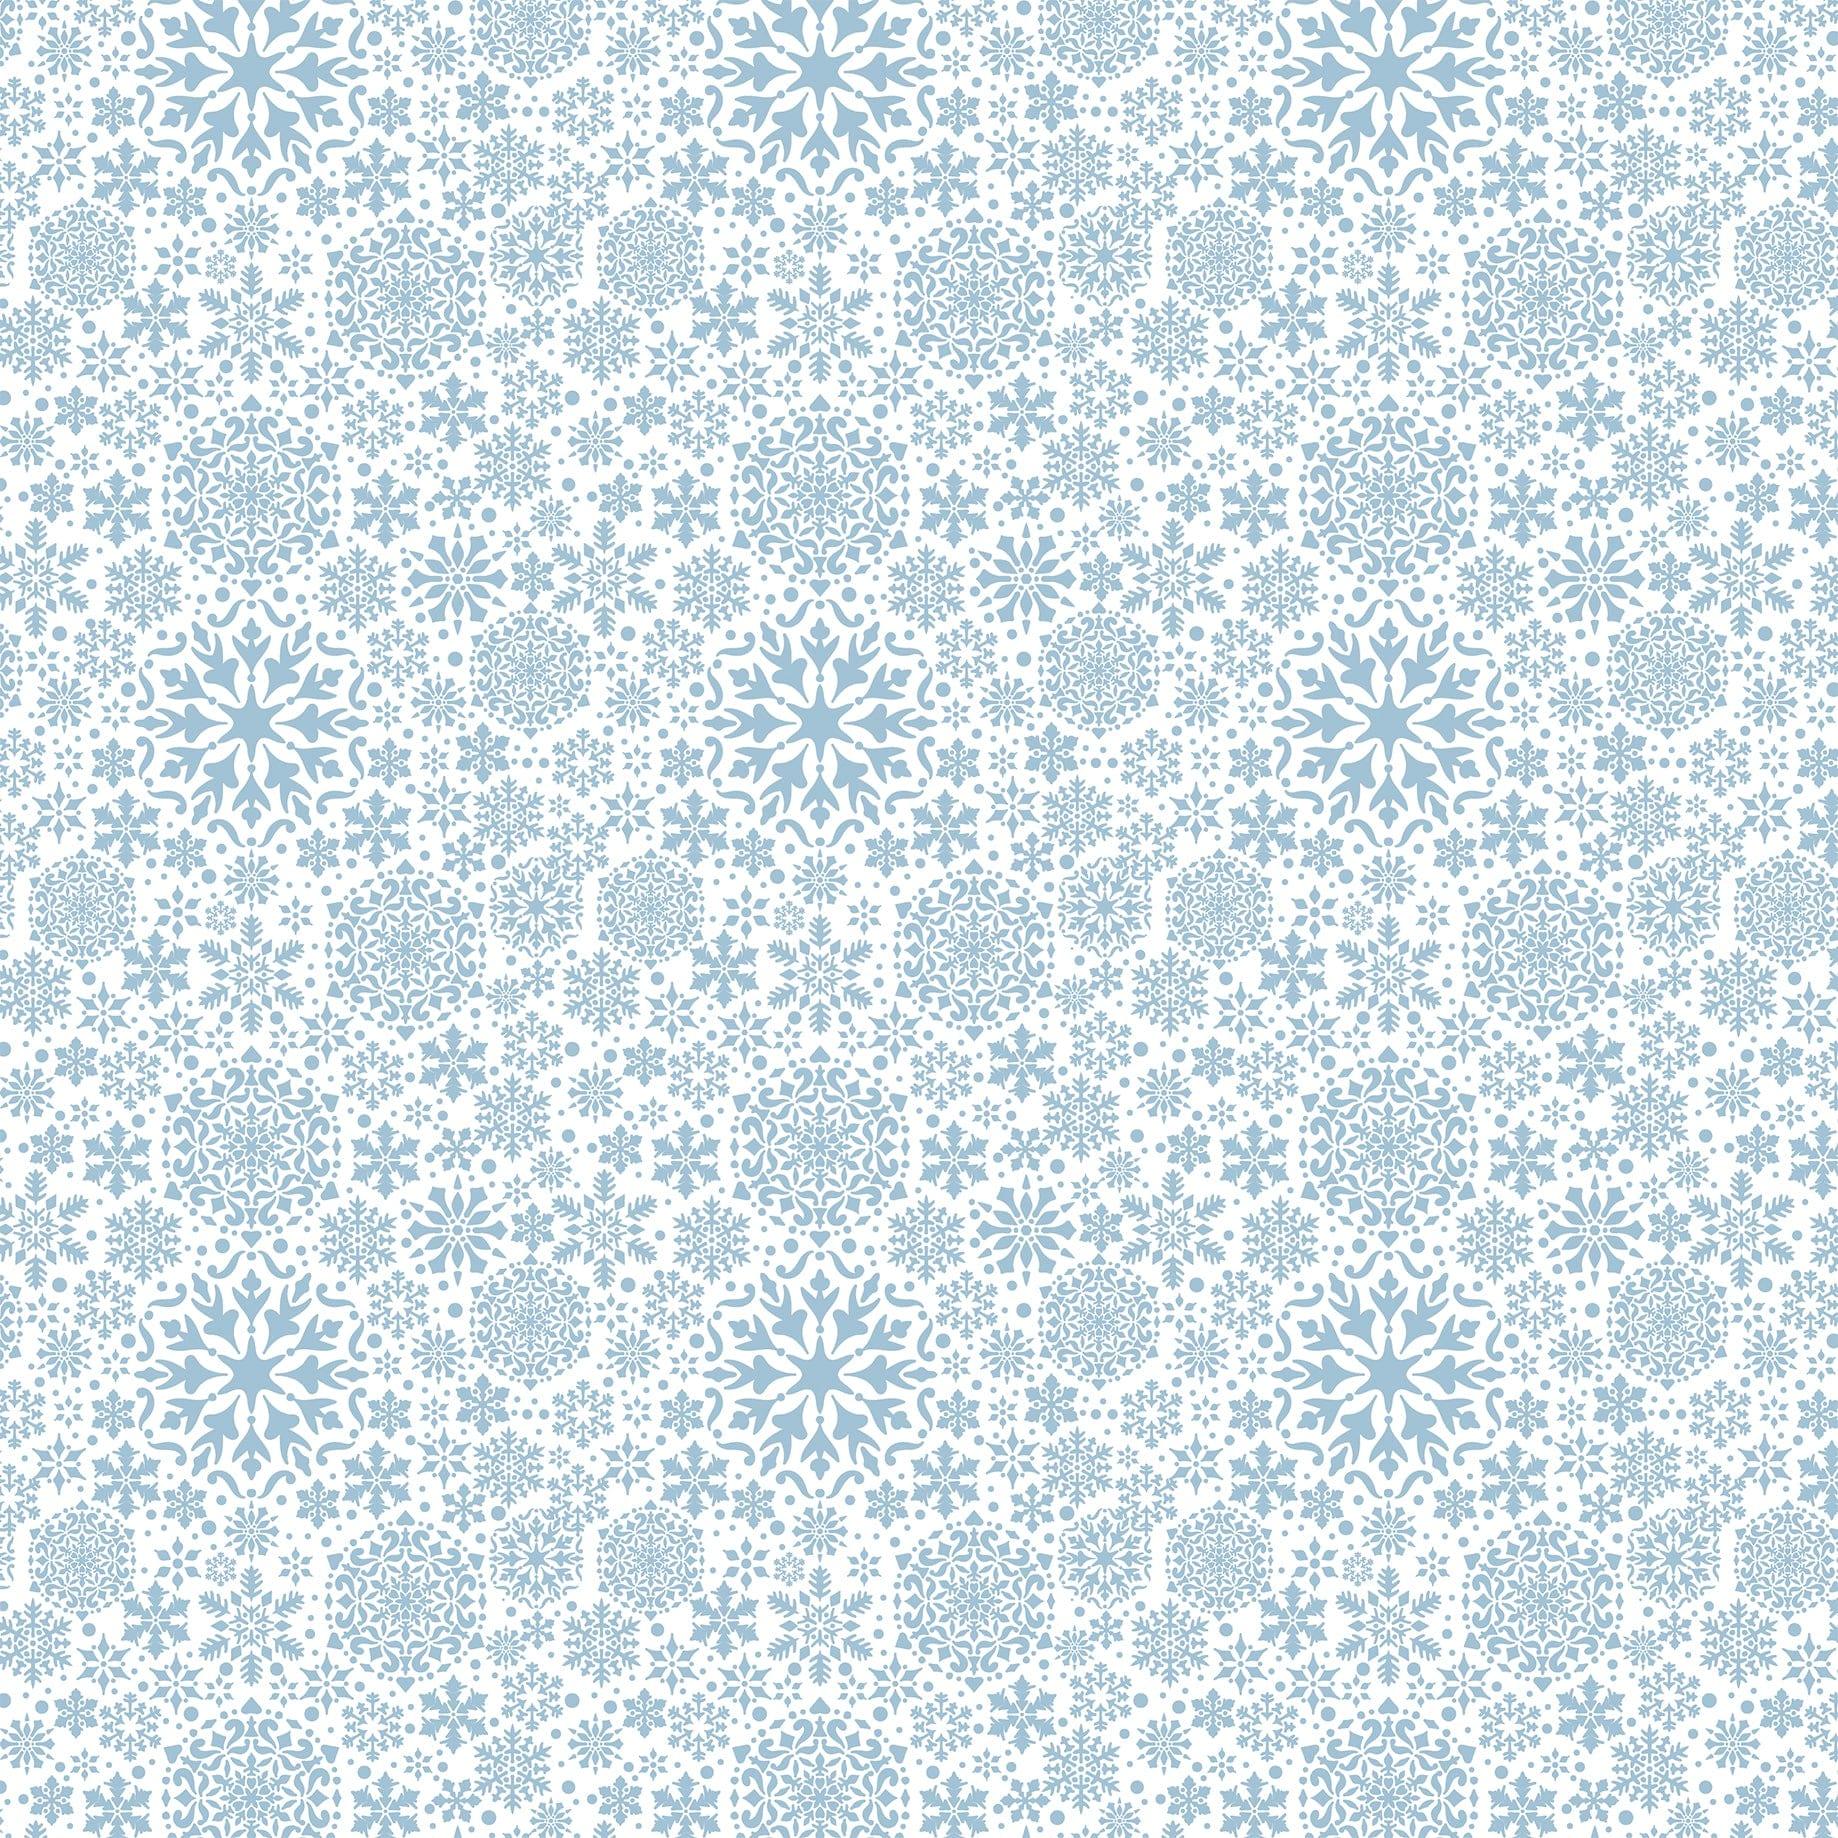 The Magic of Winter Collection Snowy Pines 12 x 12 Double-Sided Scrapbook Paper by Echo Park Paper - Scrapbook Supply Companies